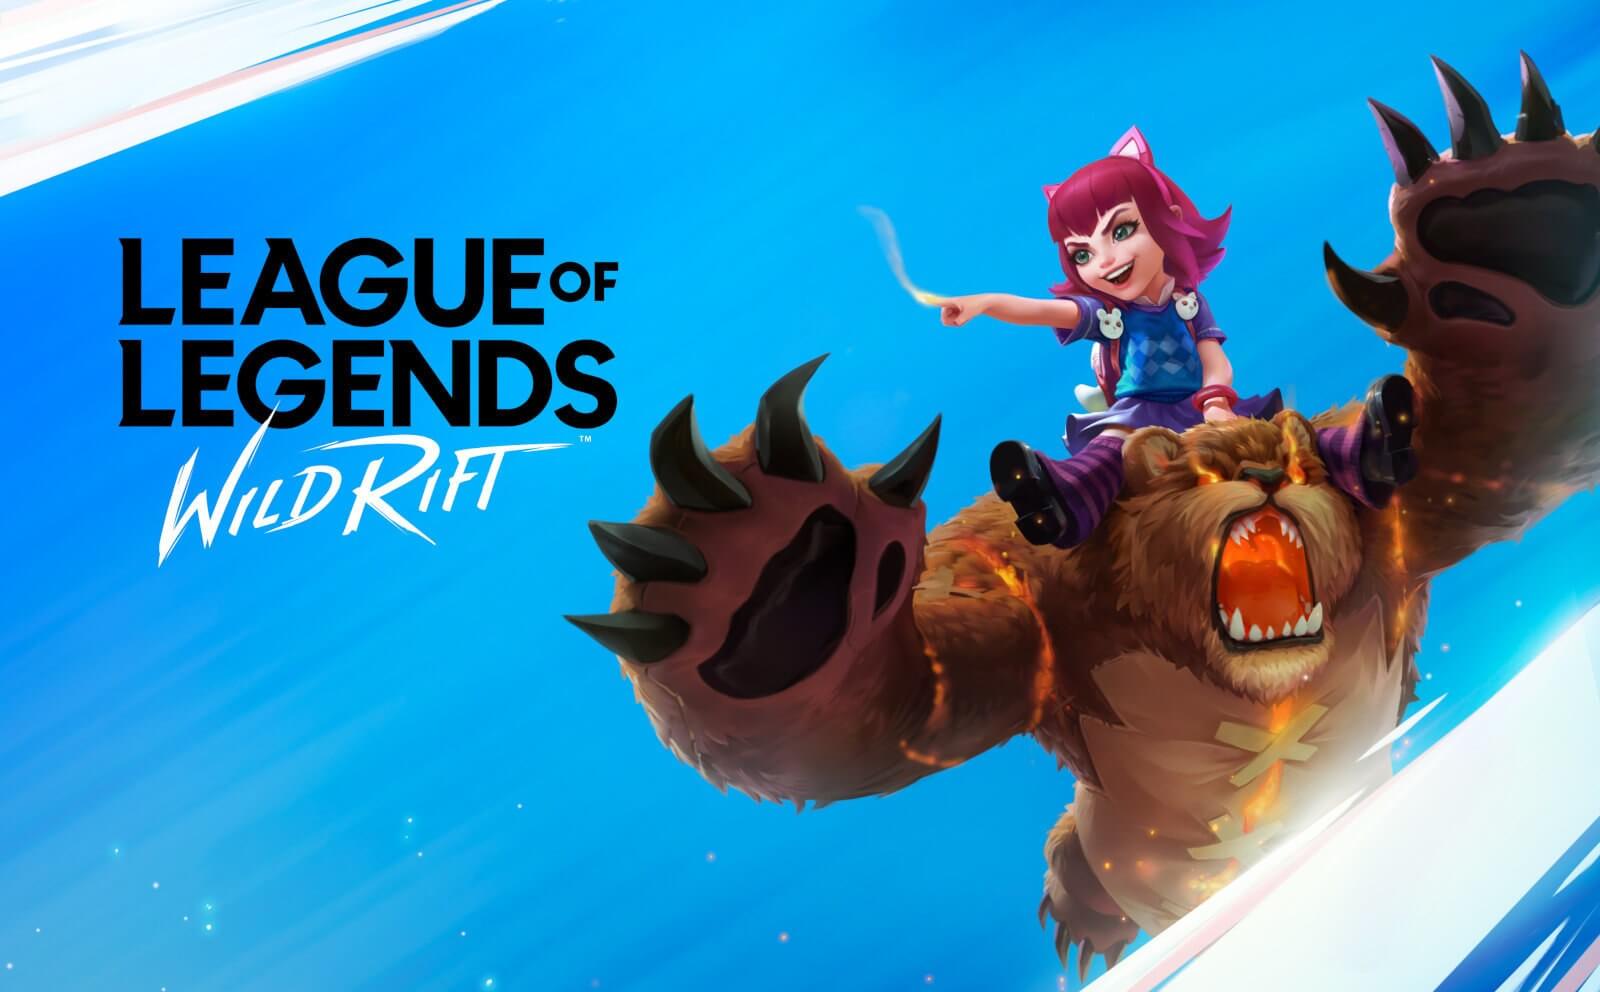 League of Legends will arrive on mobile and consoles next year